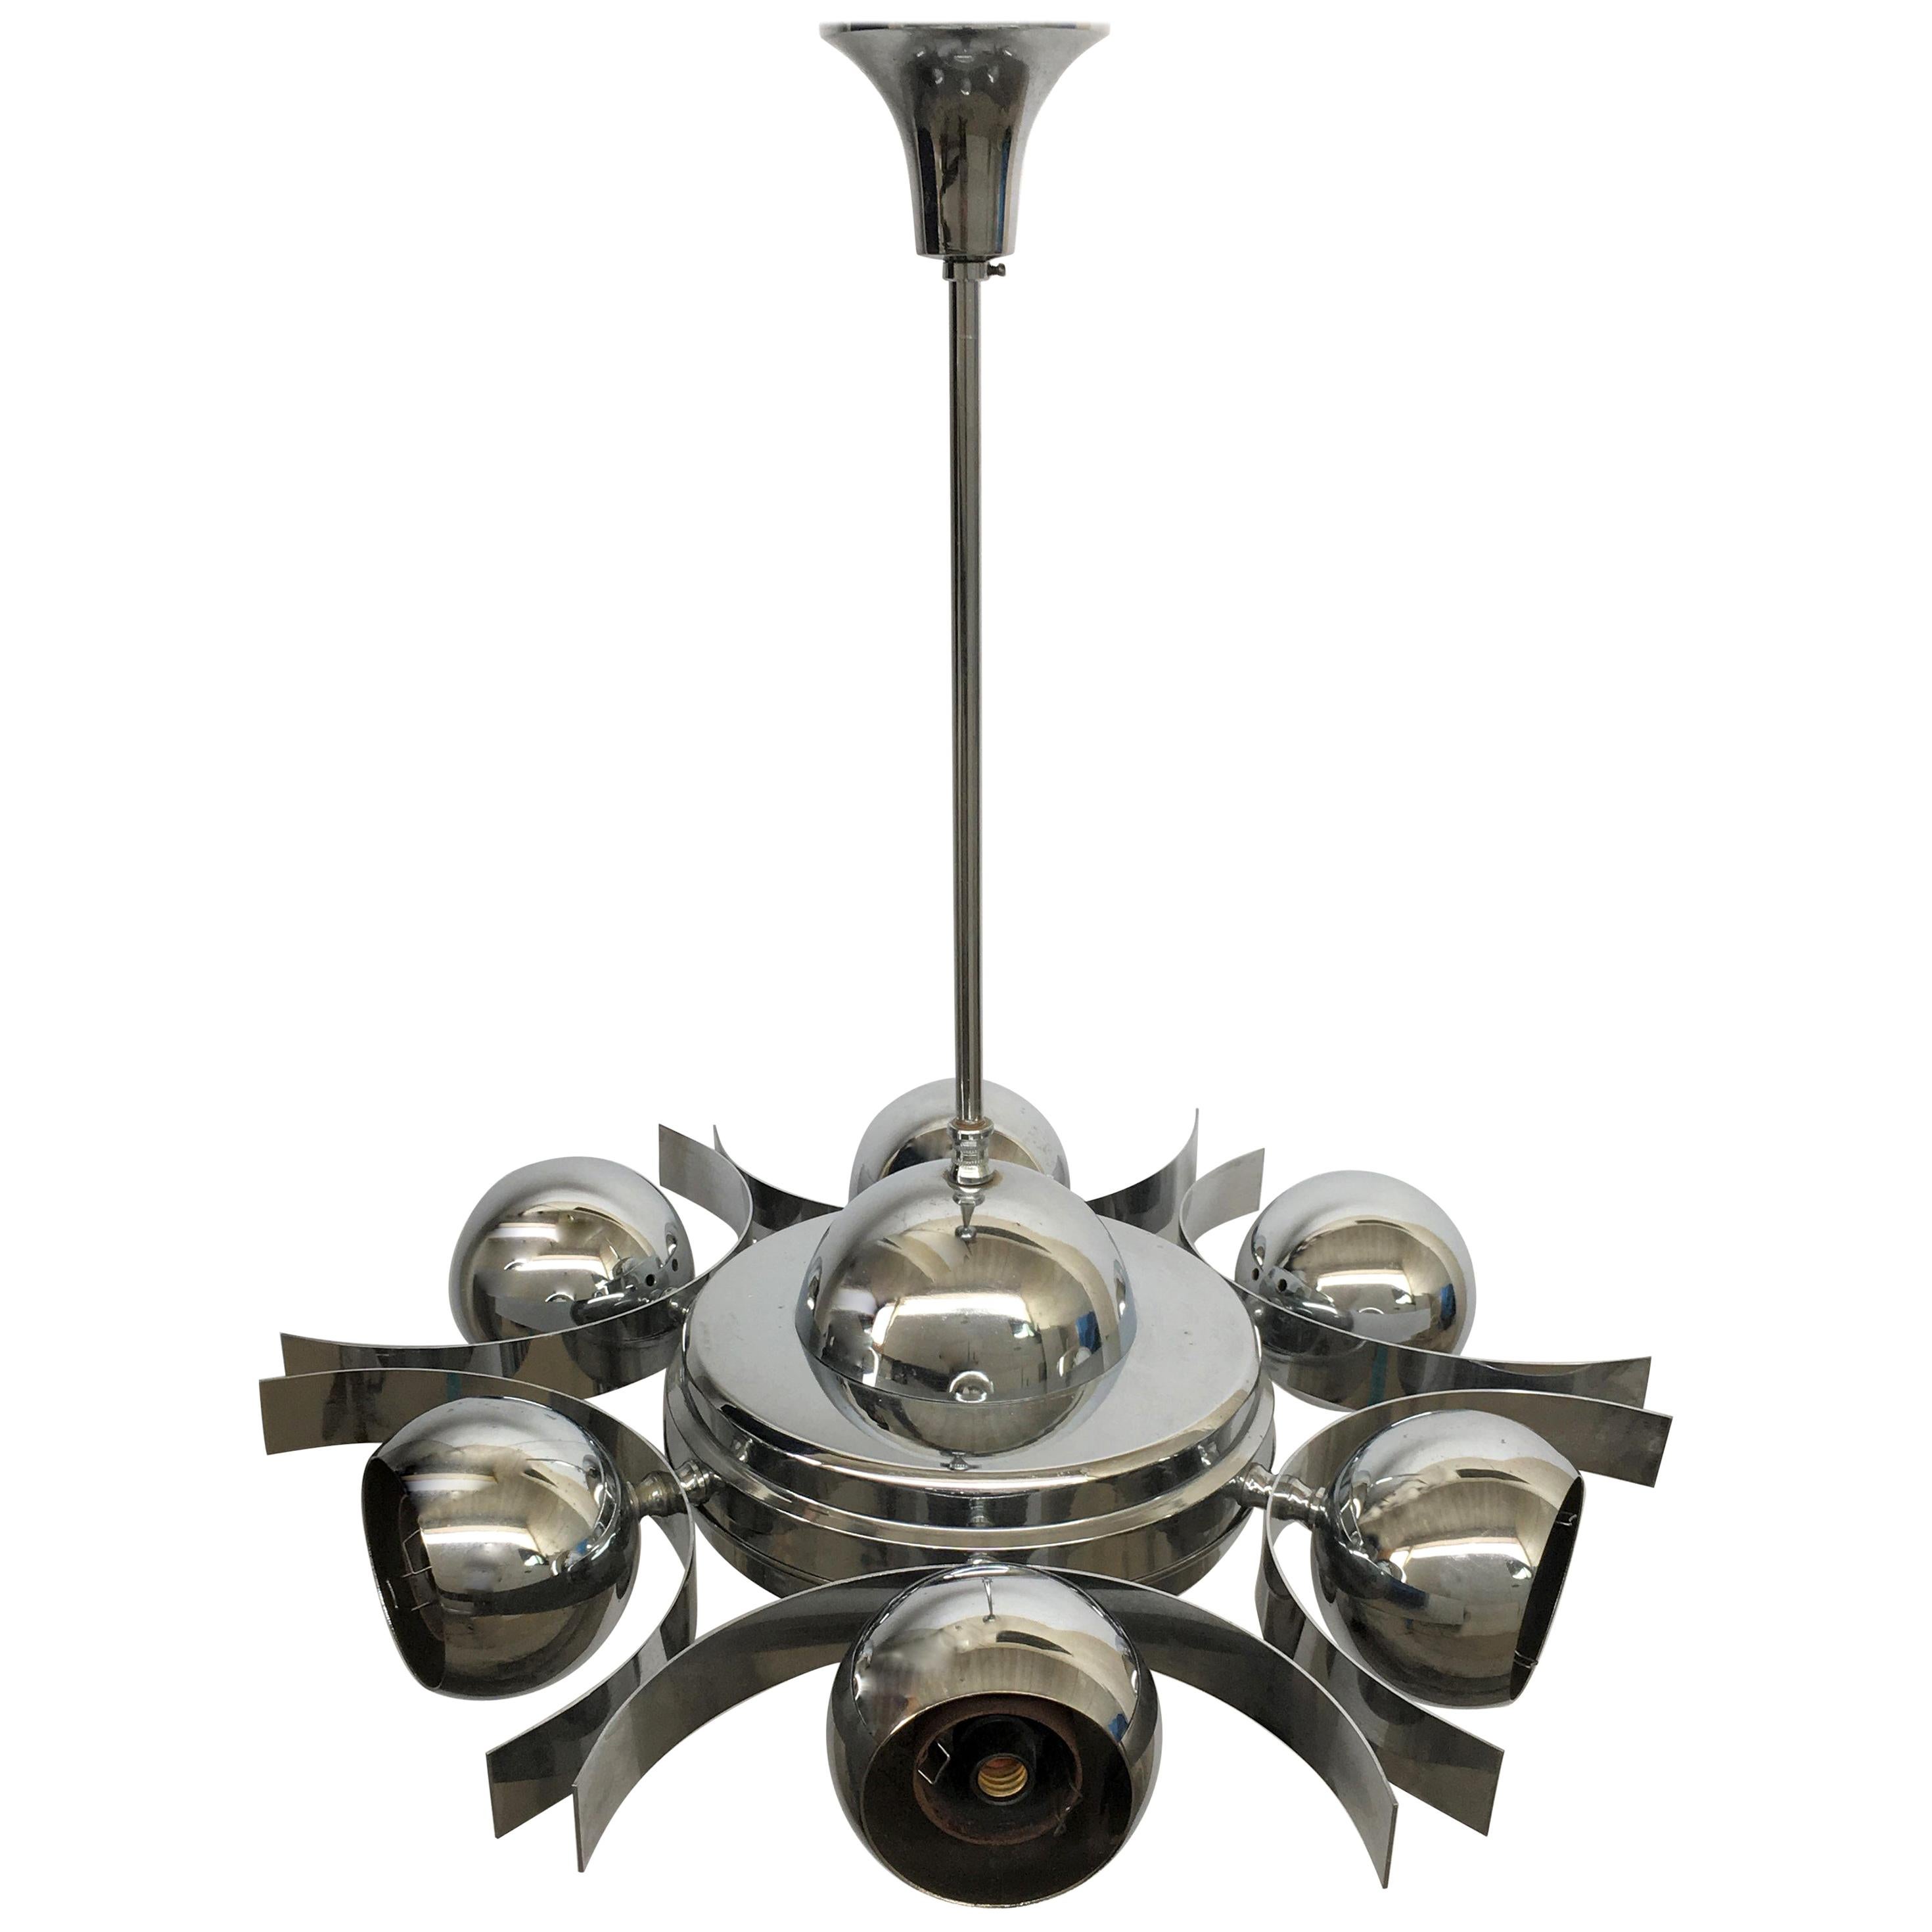 Italian Pop Art Space Age Chrome Ceiling Lamp with Six Balls, 1960s For Sale